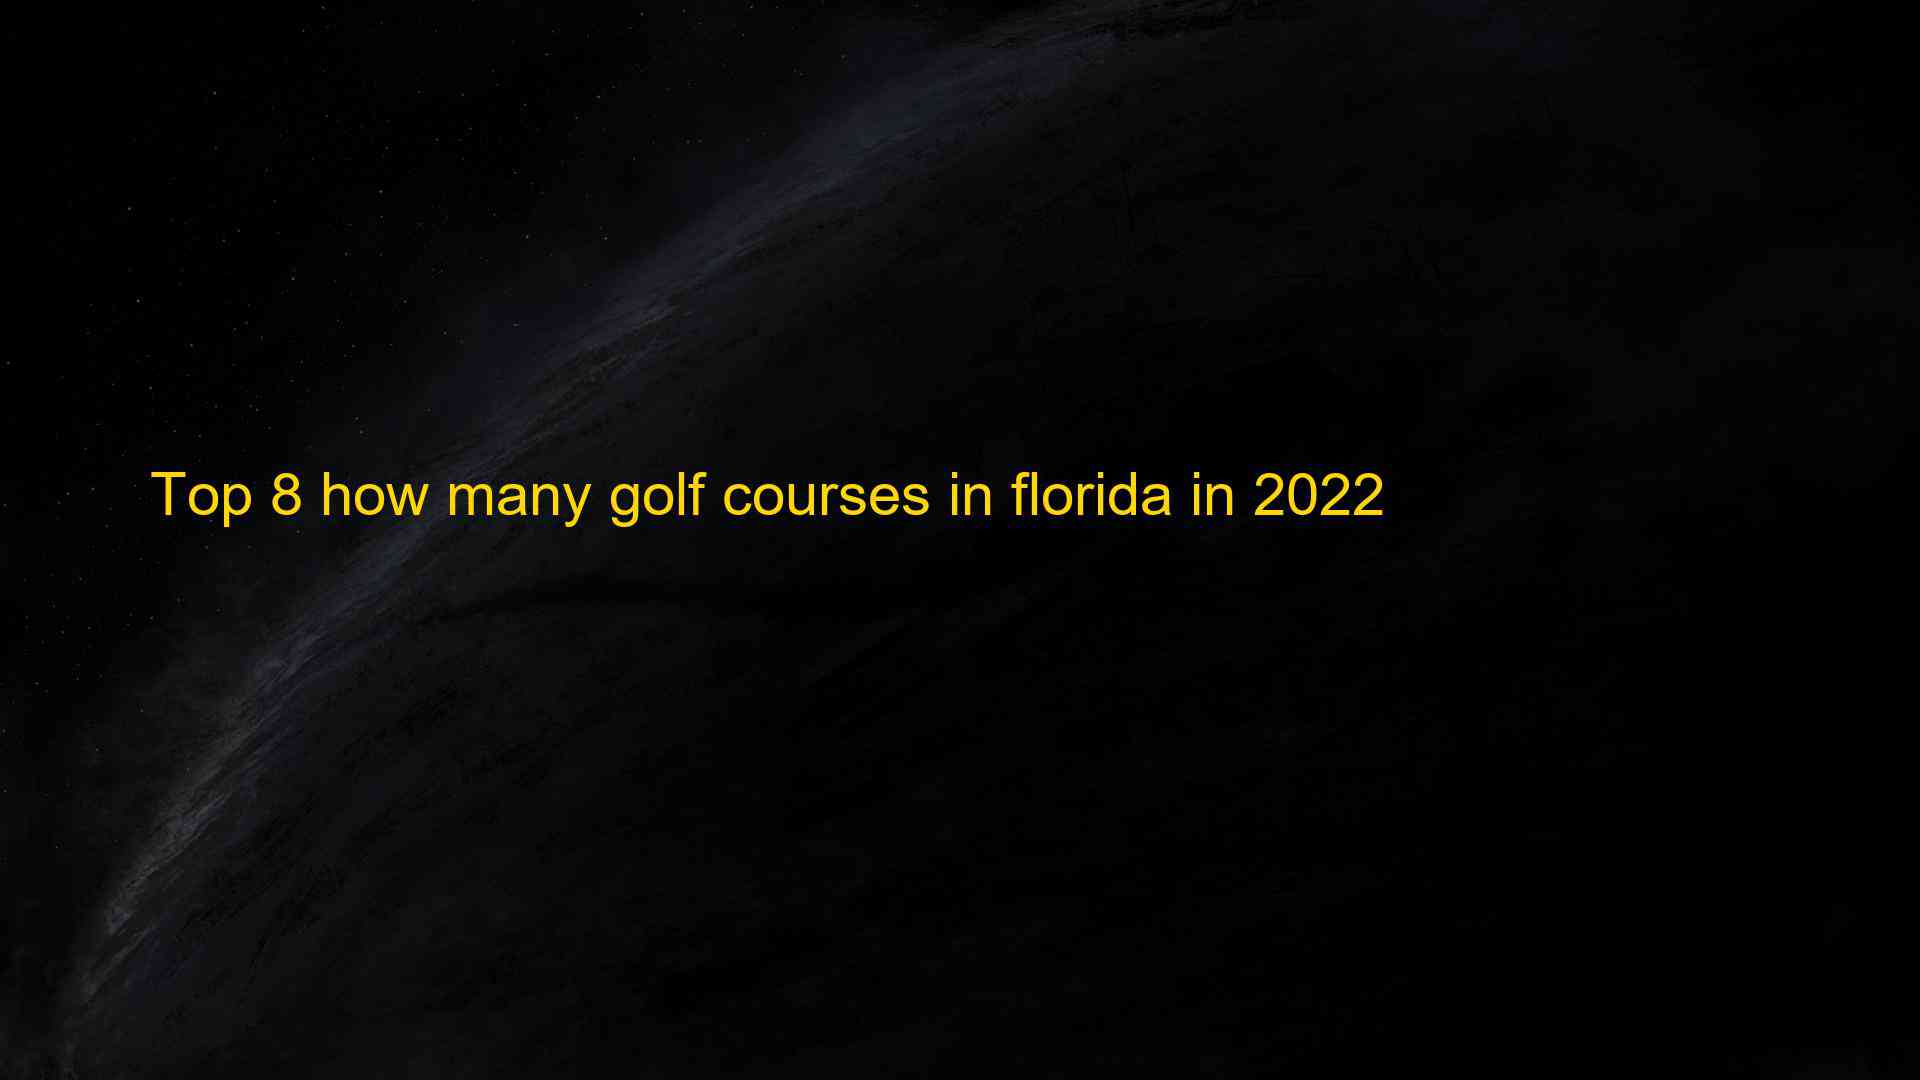 Top 8 how many golf courses in florida in 2022 1660961773